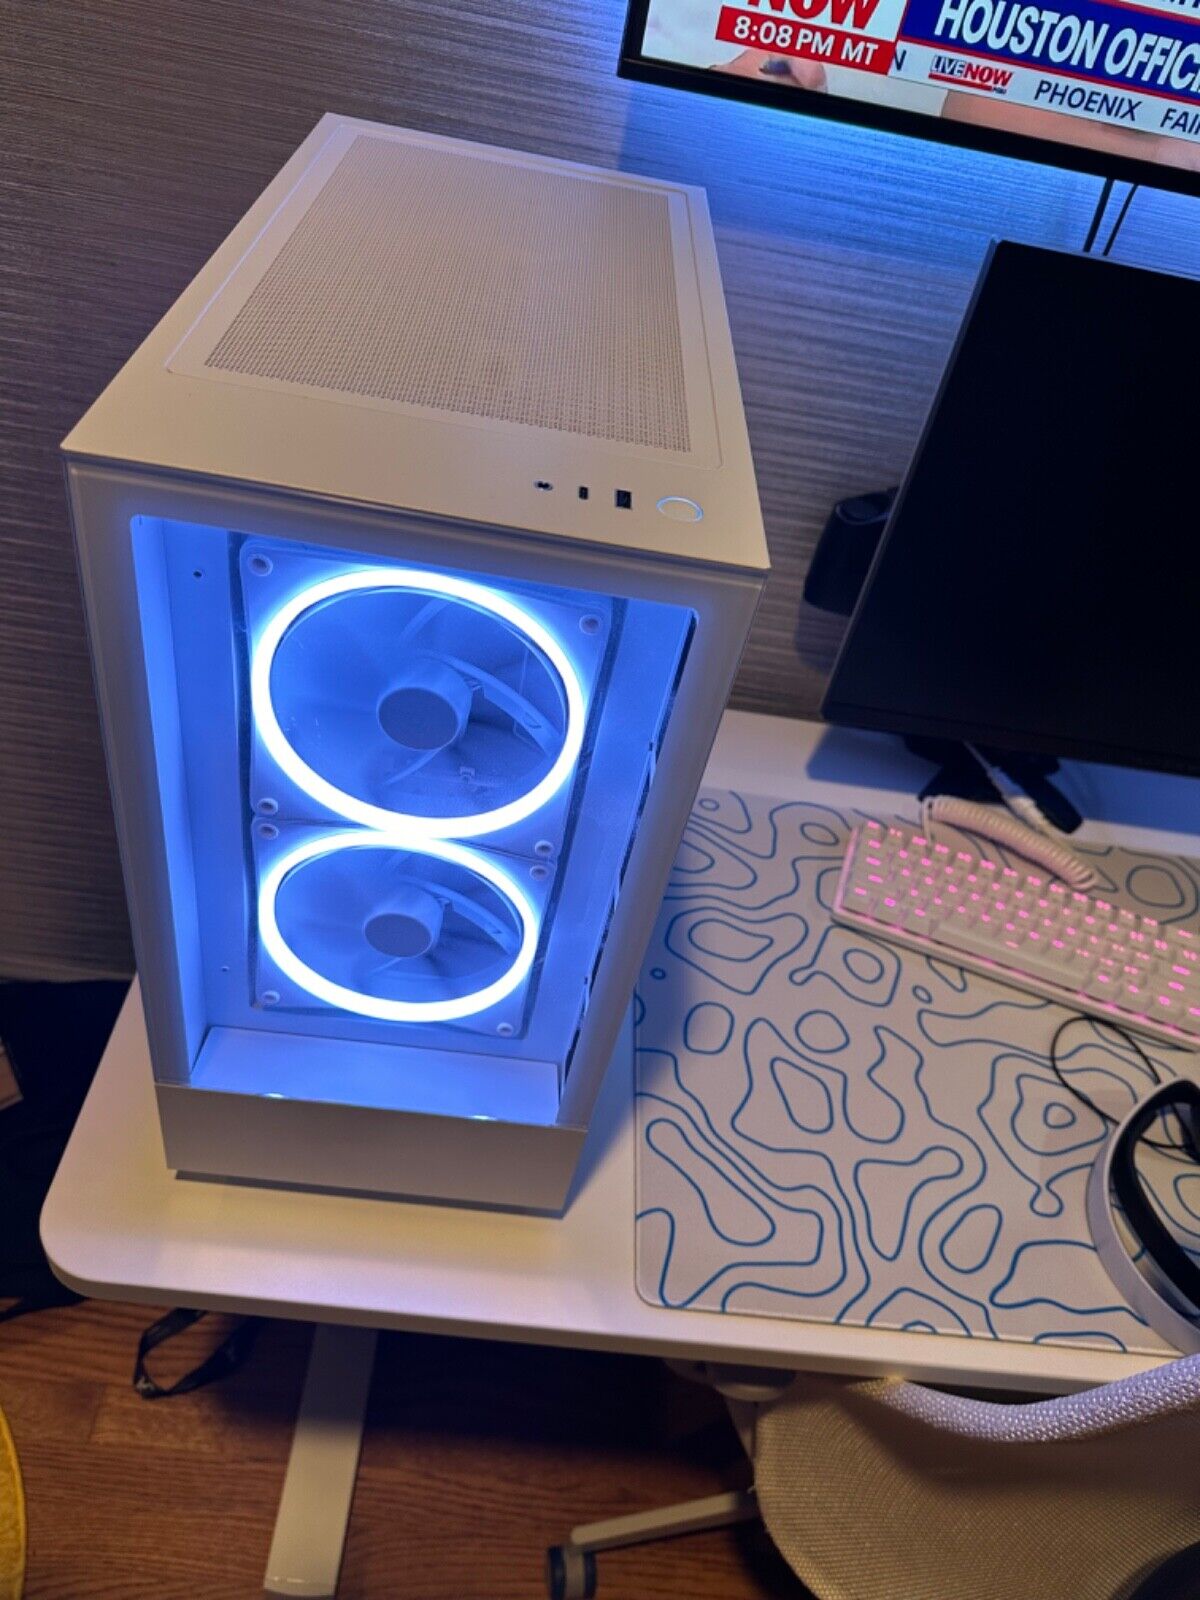 Nzxt player 2 prime, mint condition, color white comes with a stream deck 